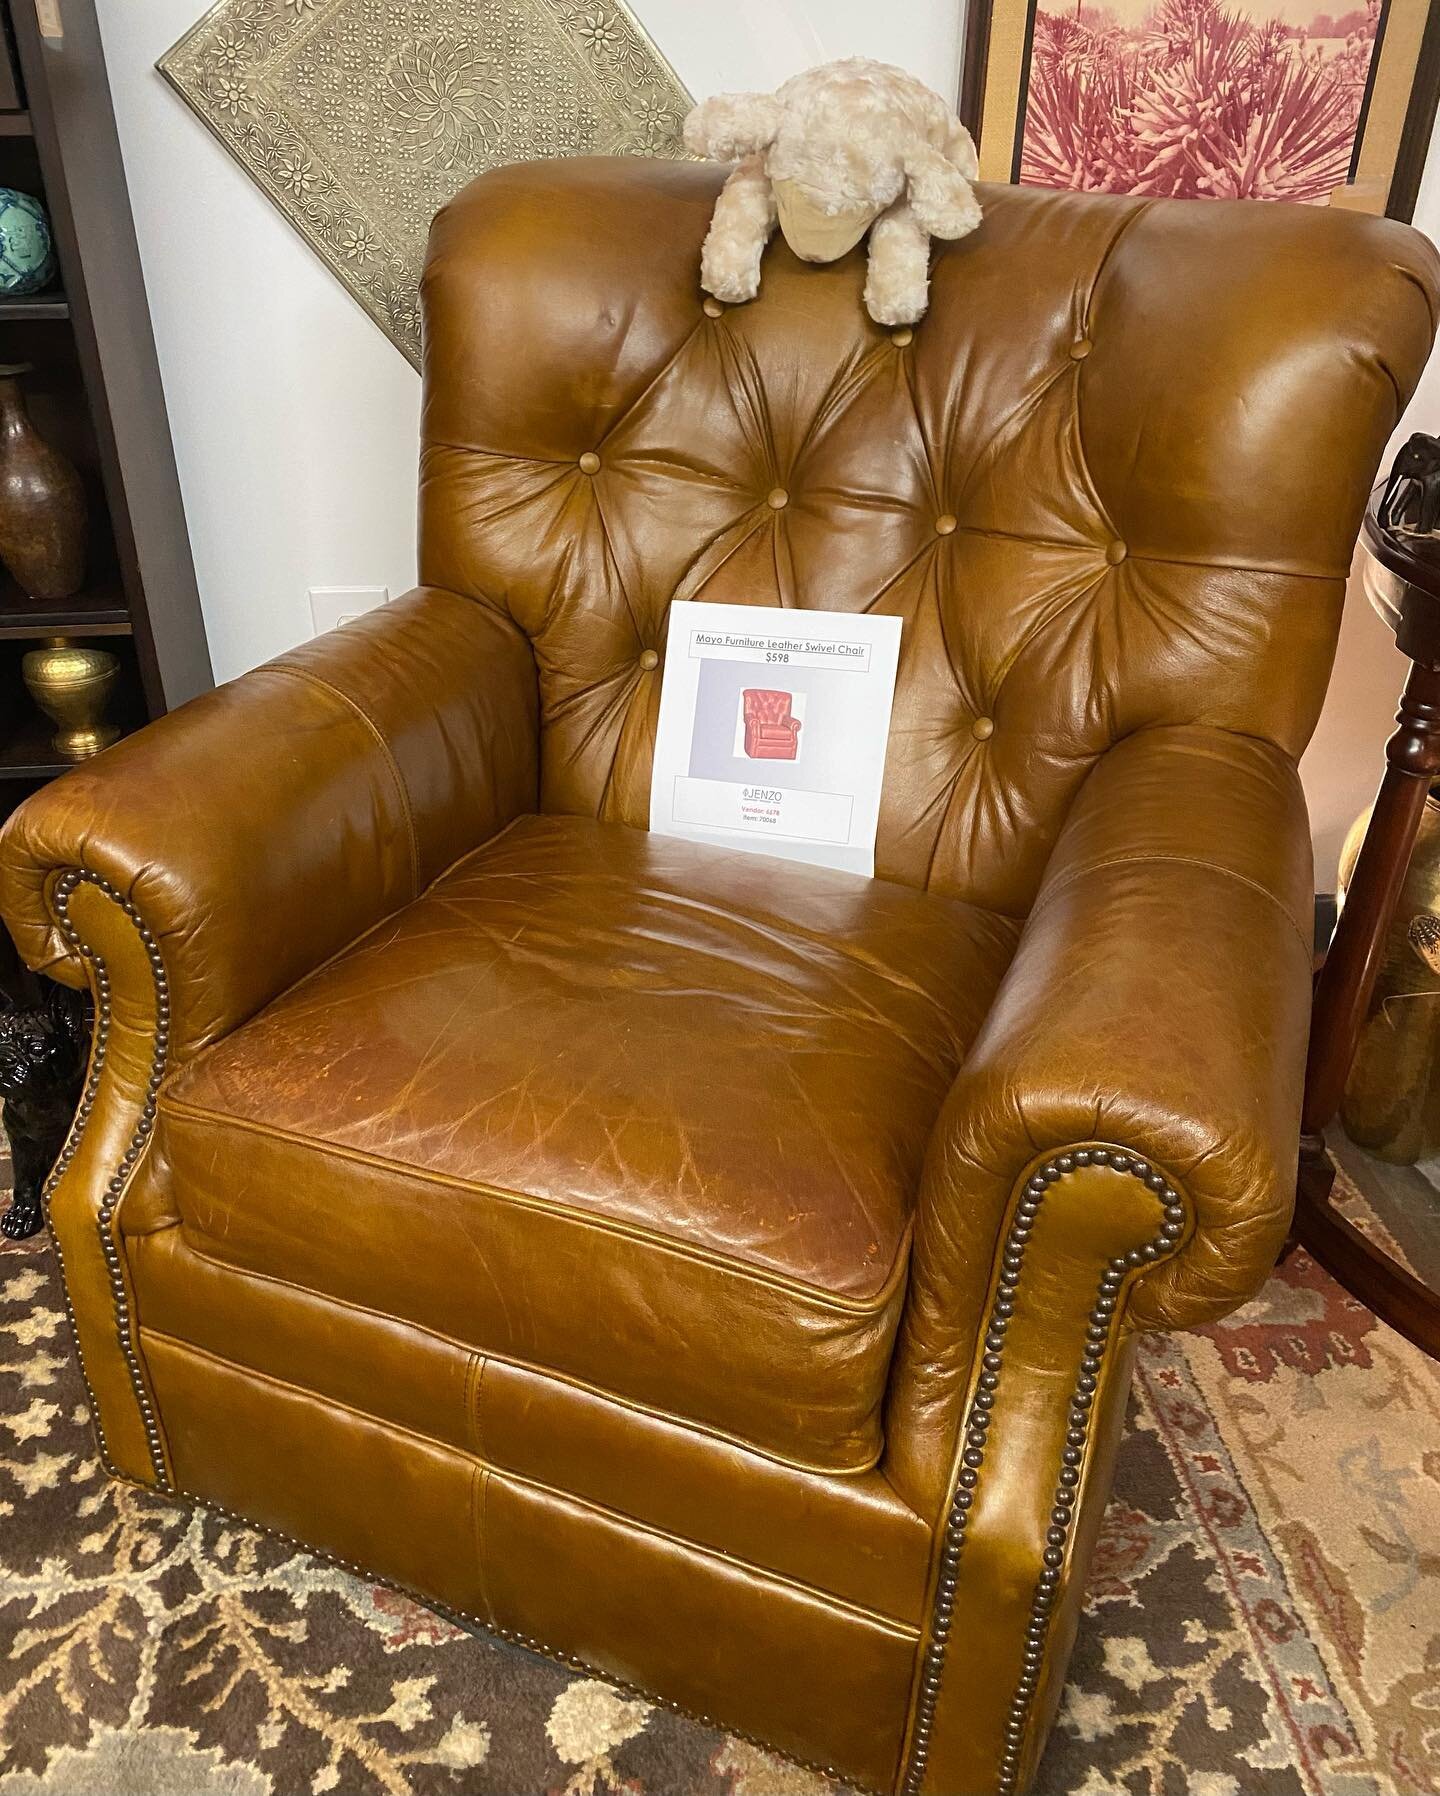 Leather Swivel Chair by Mayo Furniture 
Vintage. Good condition. Available for in store pickup. $598

Cottonwood Market
101 S Coit Road, Richardson,TX

https://www.cottonwoodmarket.com/

Shop 1506 - Jenzo

#shoplocal #texasvintage #dallasinteriordesi